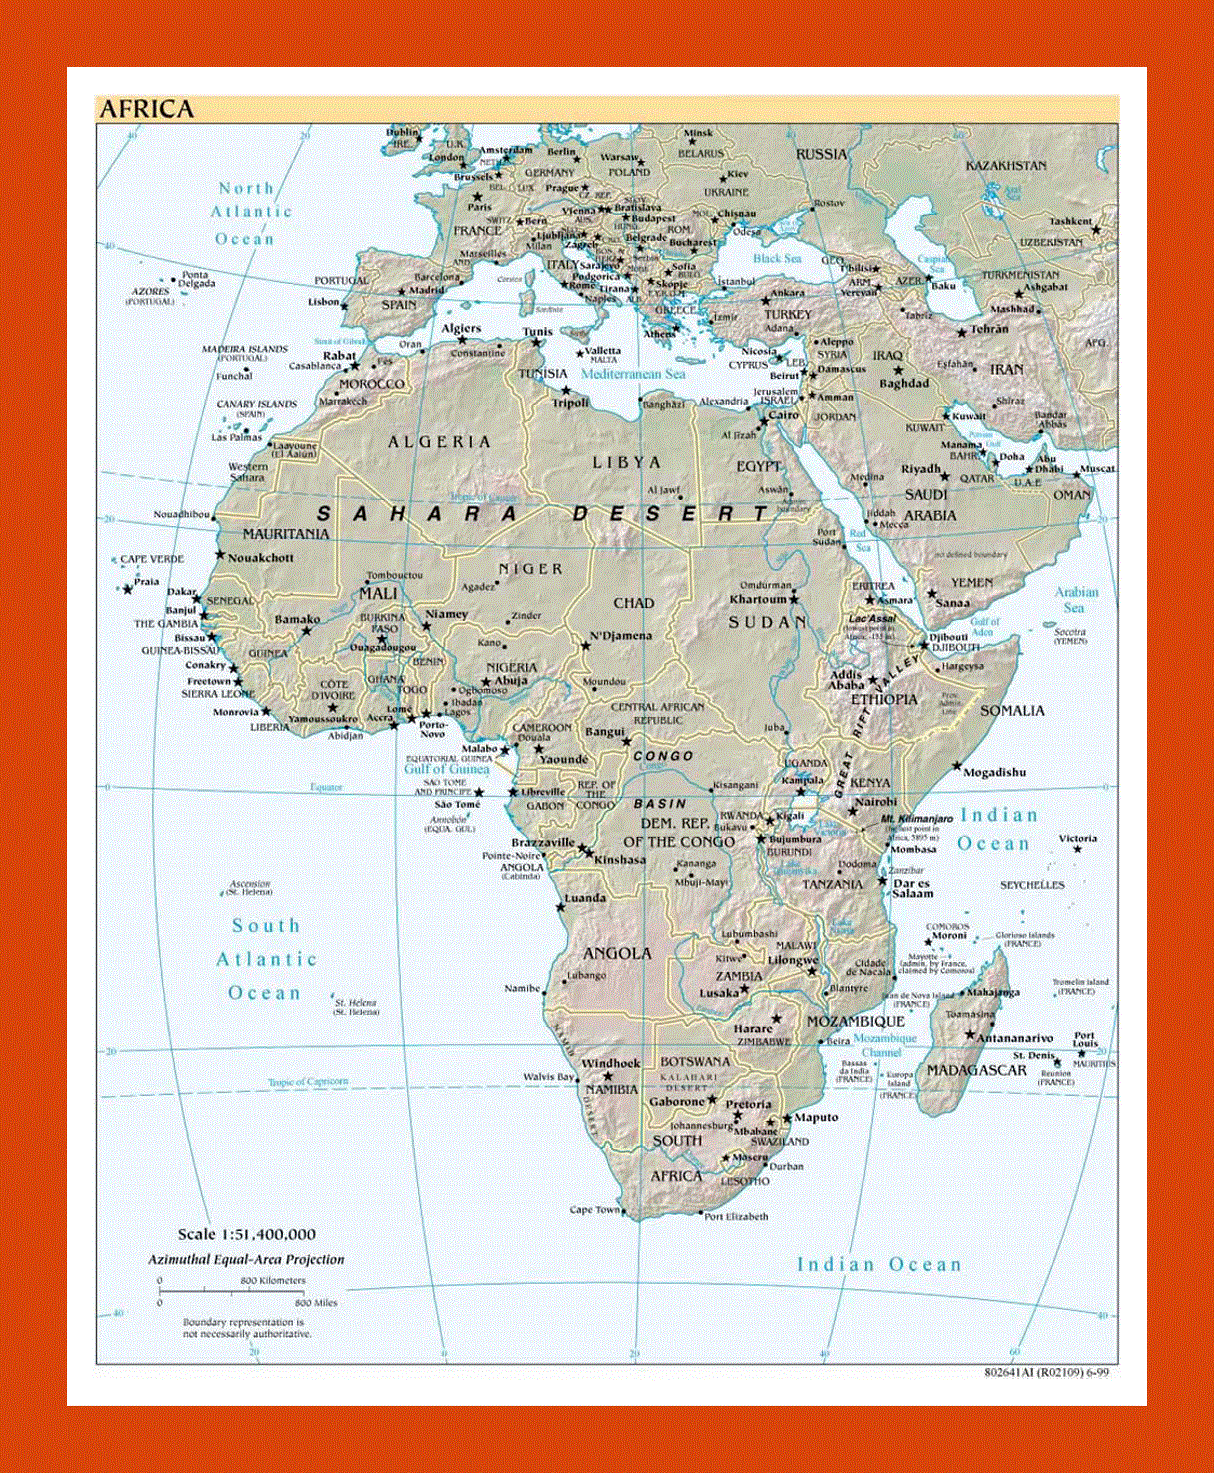 Political map of Africa - 1999